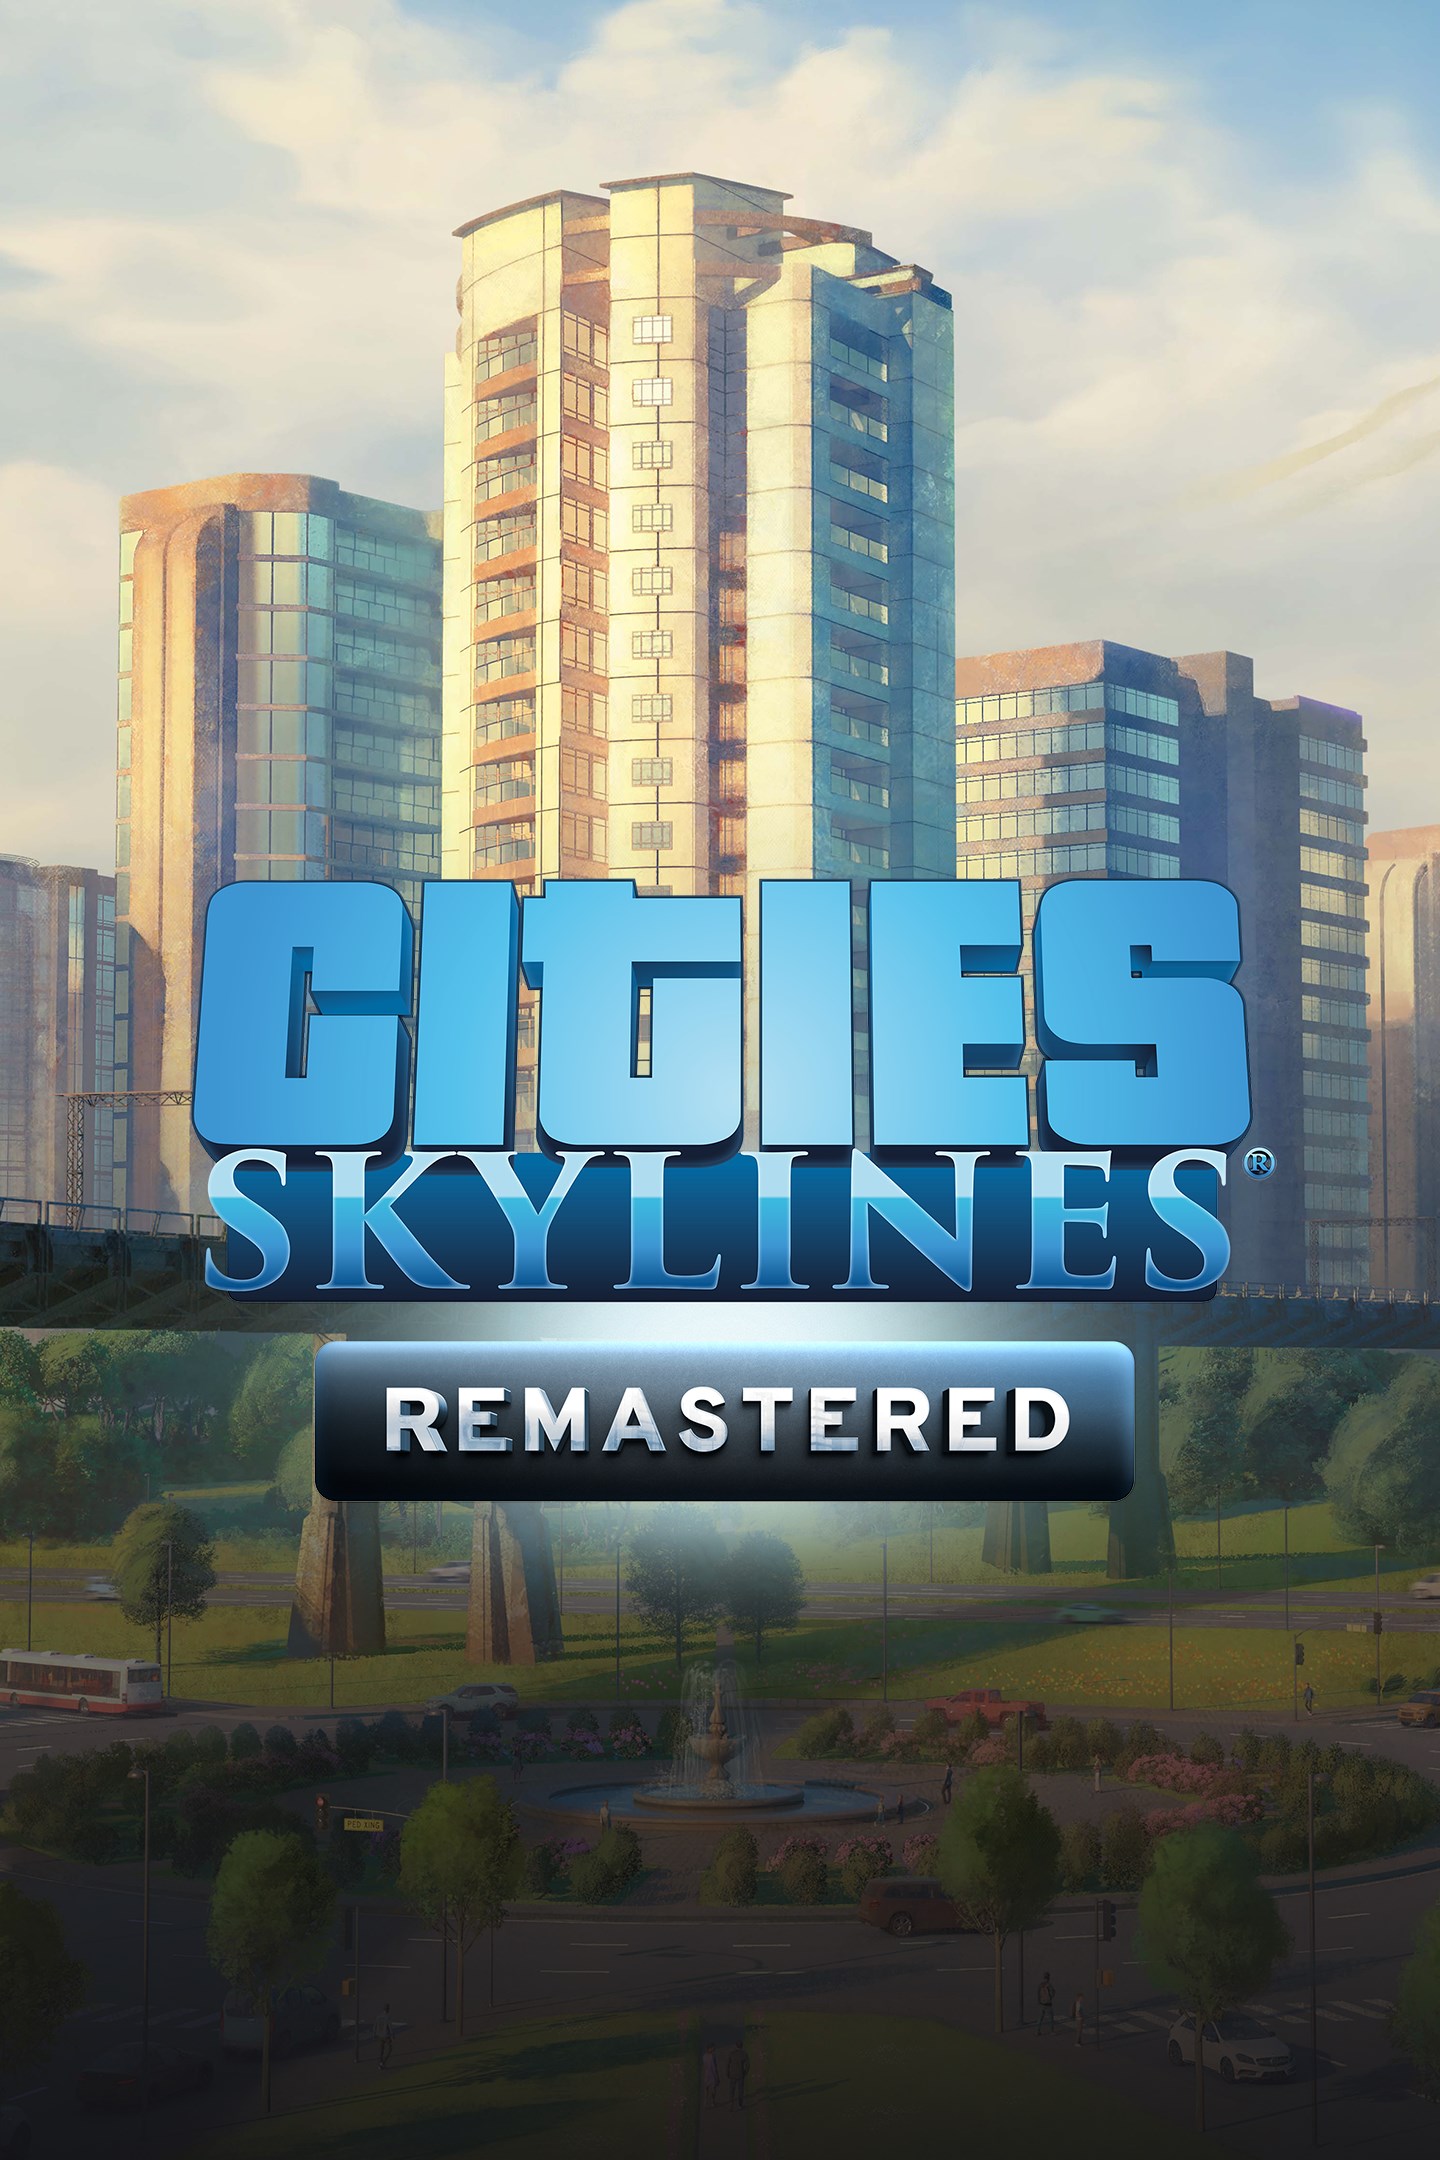 Verlichting Snooze Accor Play Cities: Skylines - Remastered | Xbox Cloud Gaming (Beta) on Xbox.com